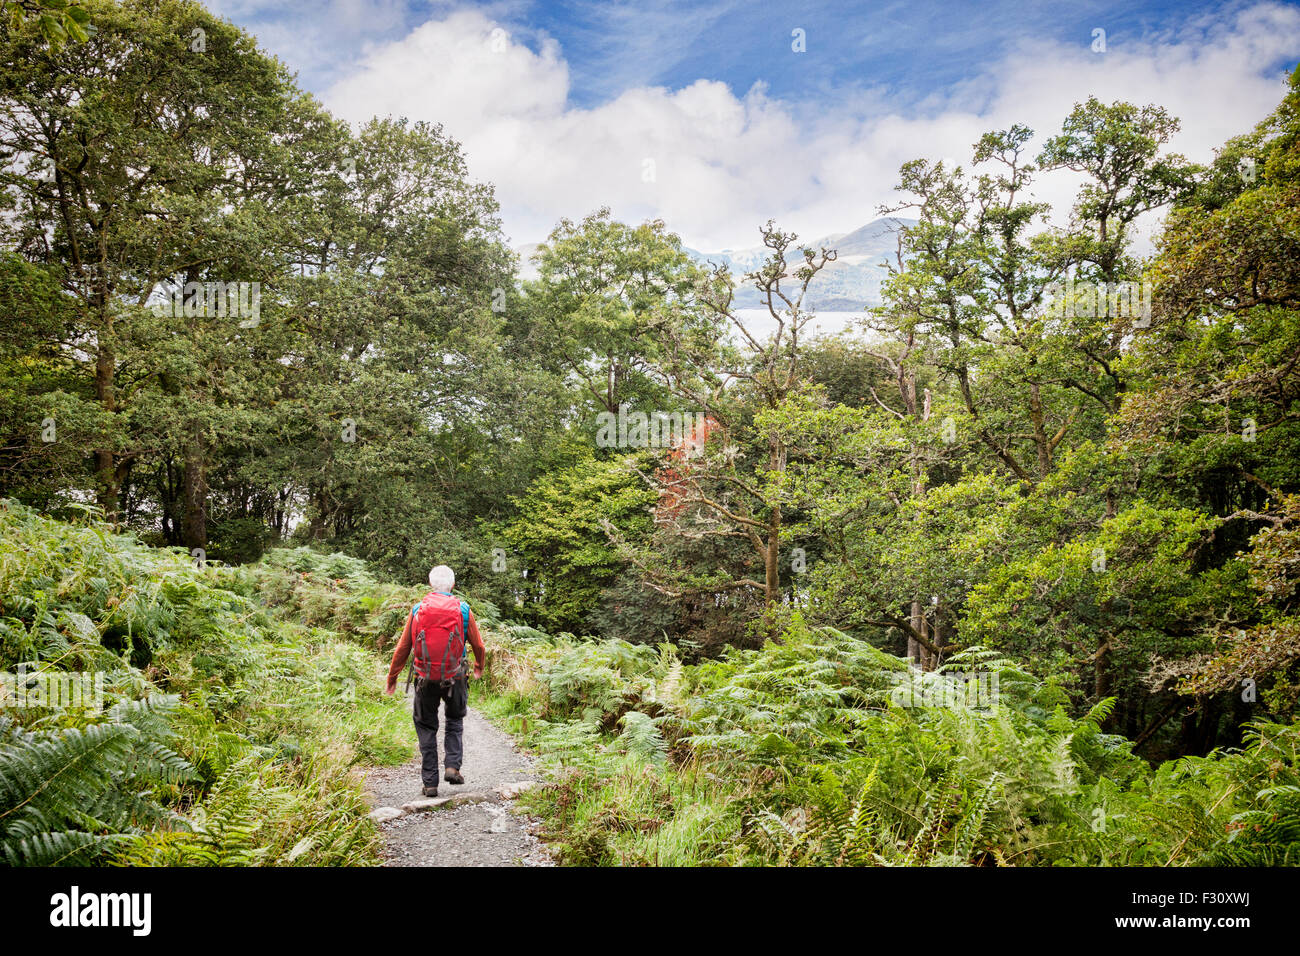 Senior man with red rucksack hiking the West Highland Way, as it runs through forest beside the eastern side of Loch Lomond... Stock Photo